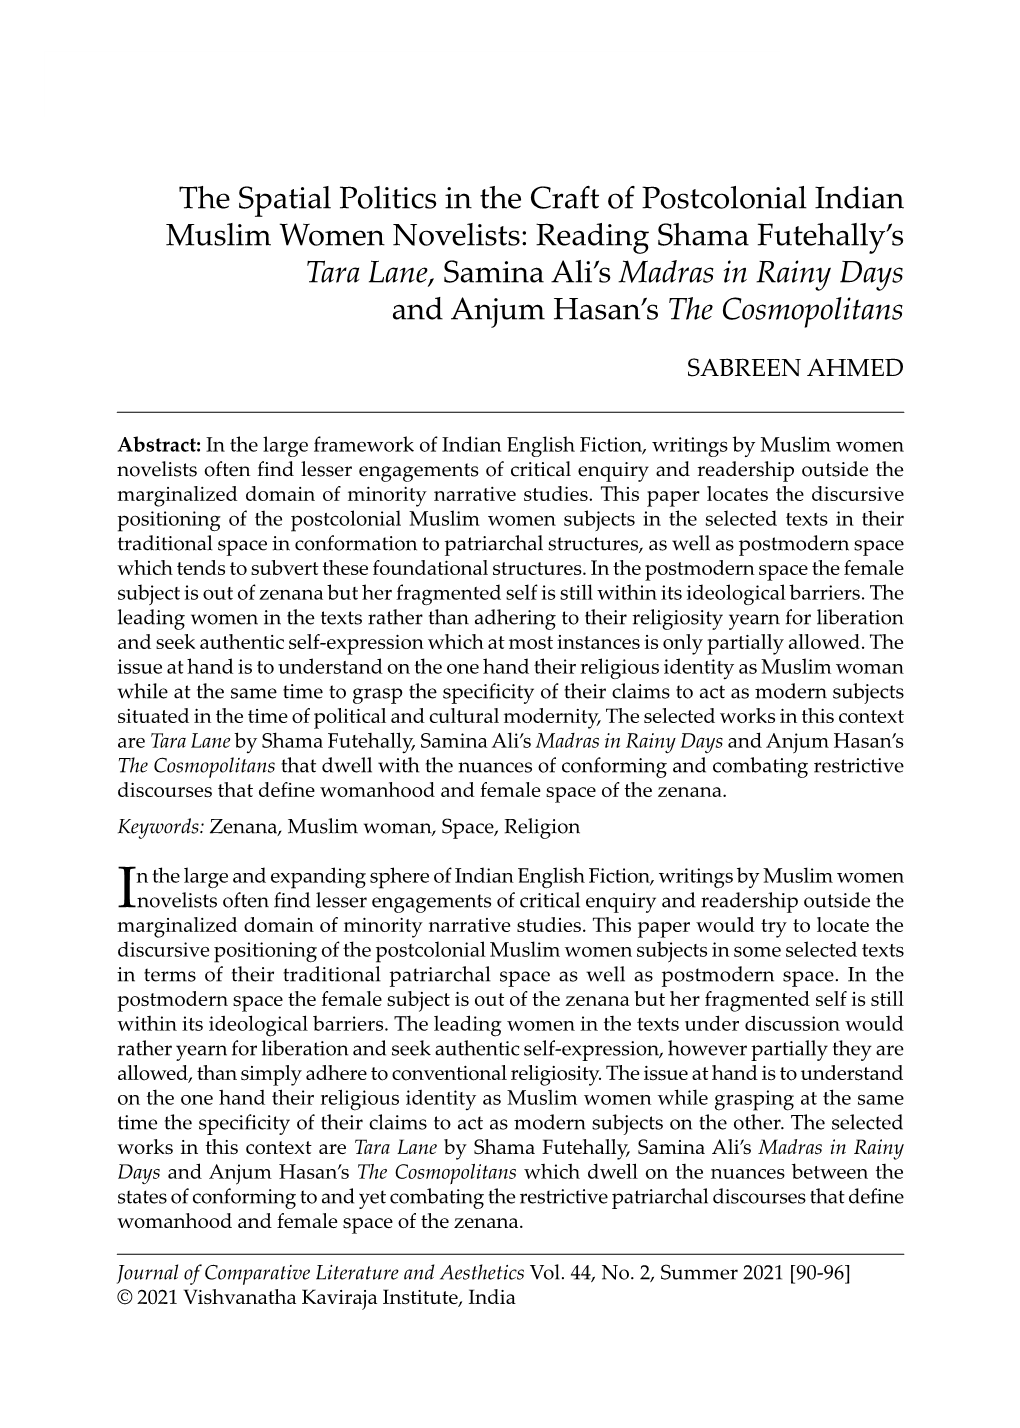 The Spatial Politics in the Craft of Postcolonial Indian Muslim Women